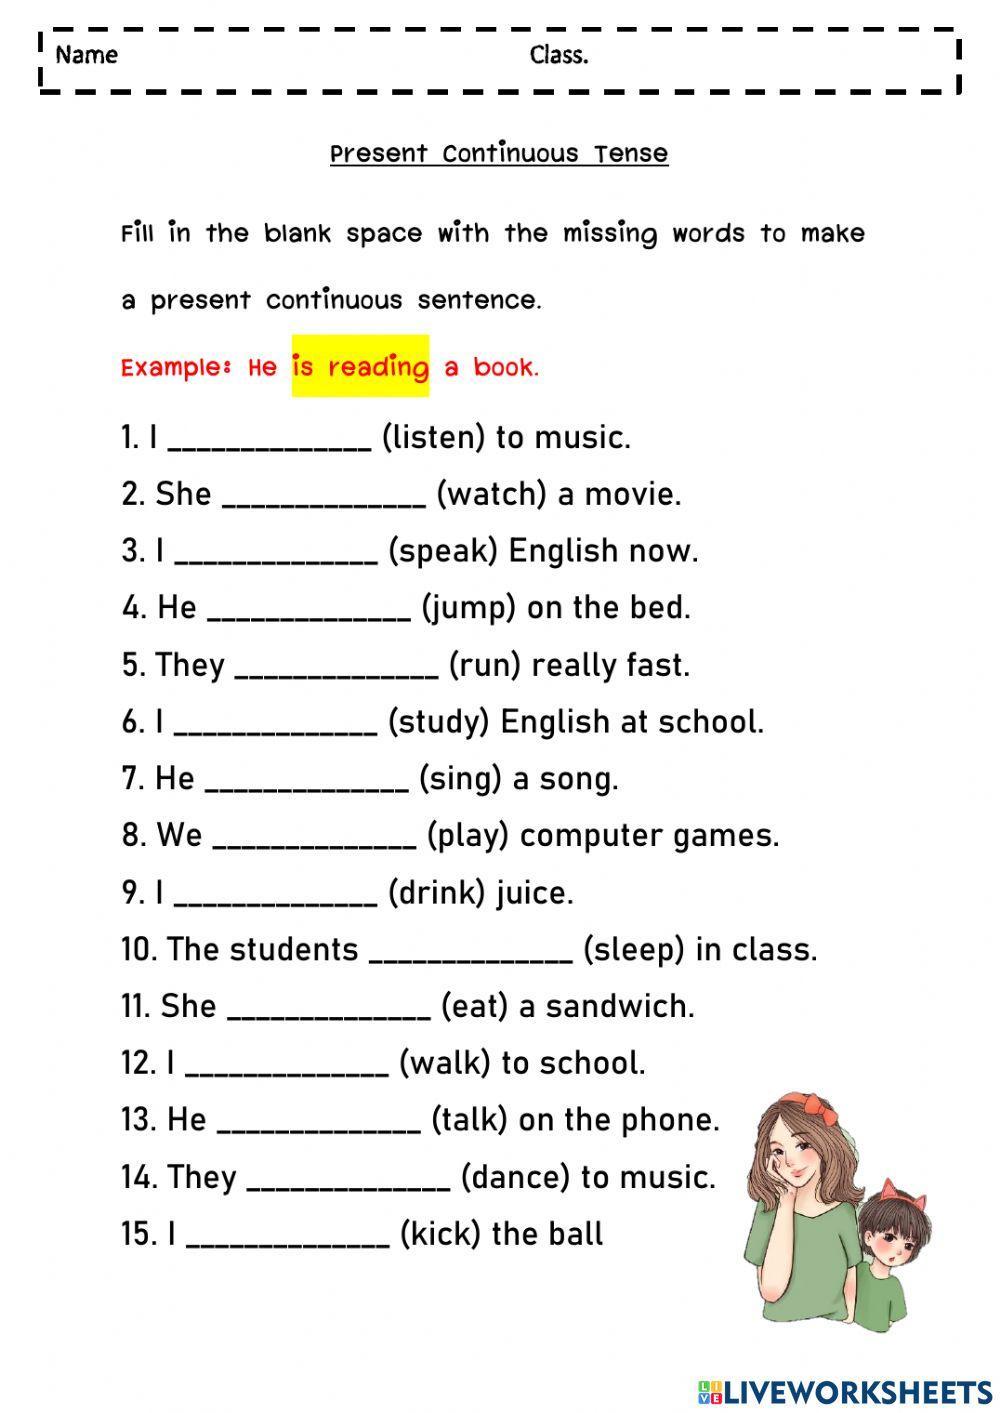 Present Continuous Tense activity for Grade 7-9 | Live Worksheets